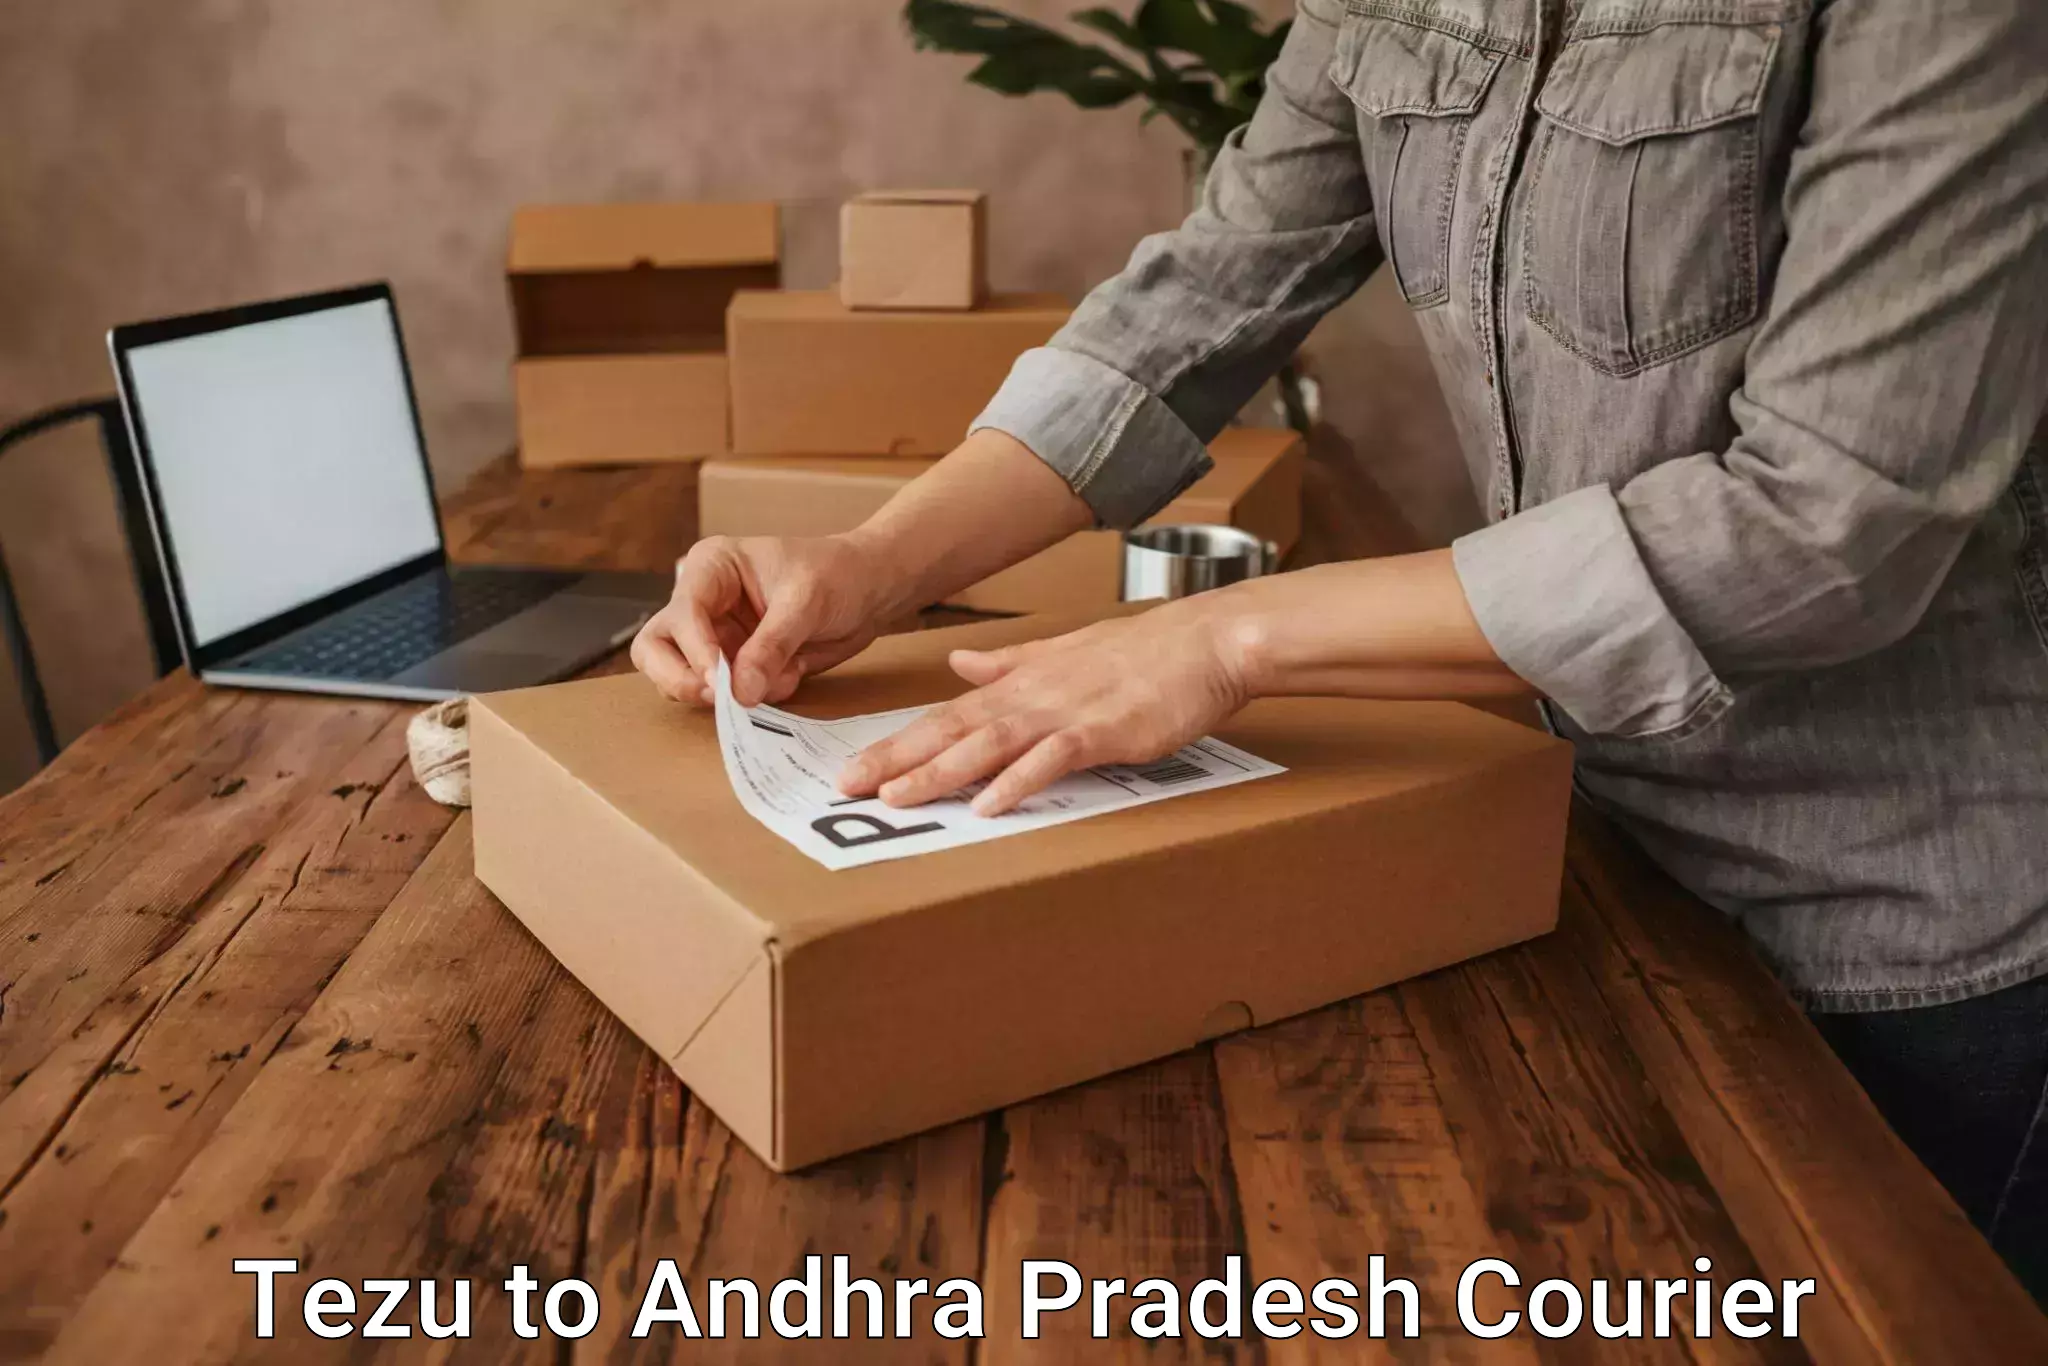 Expedited parcel delivery Tezu to Tripuranthakam